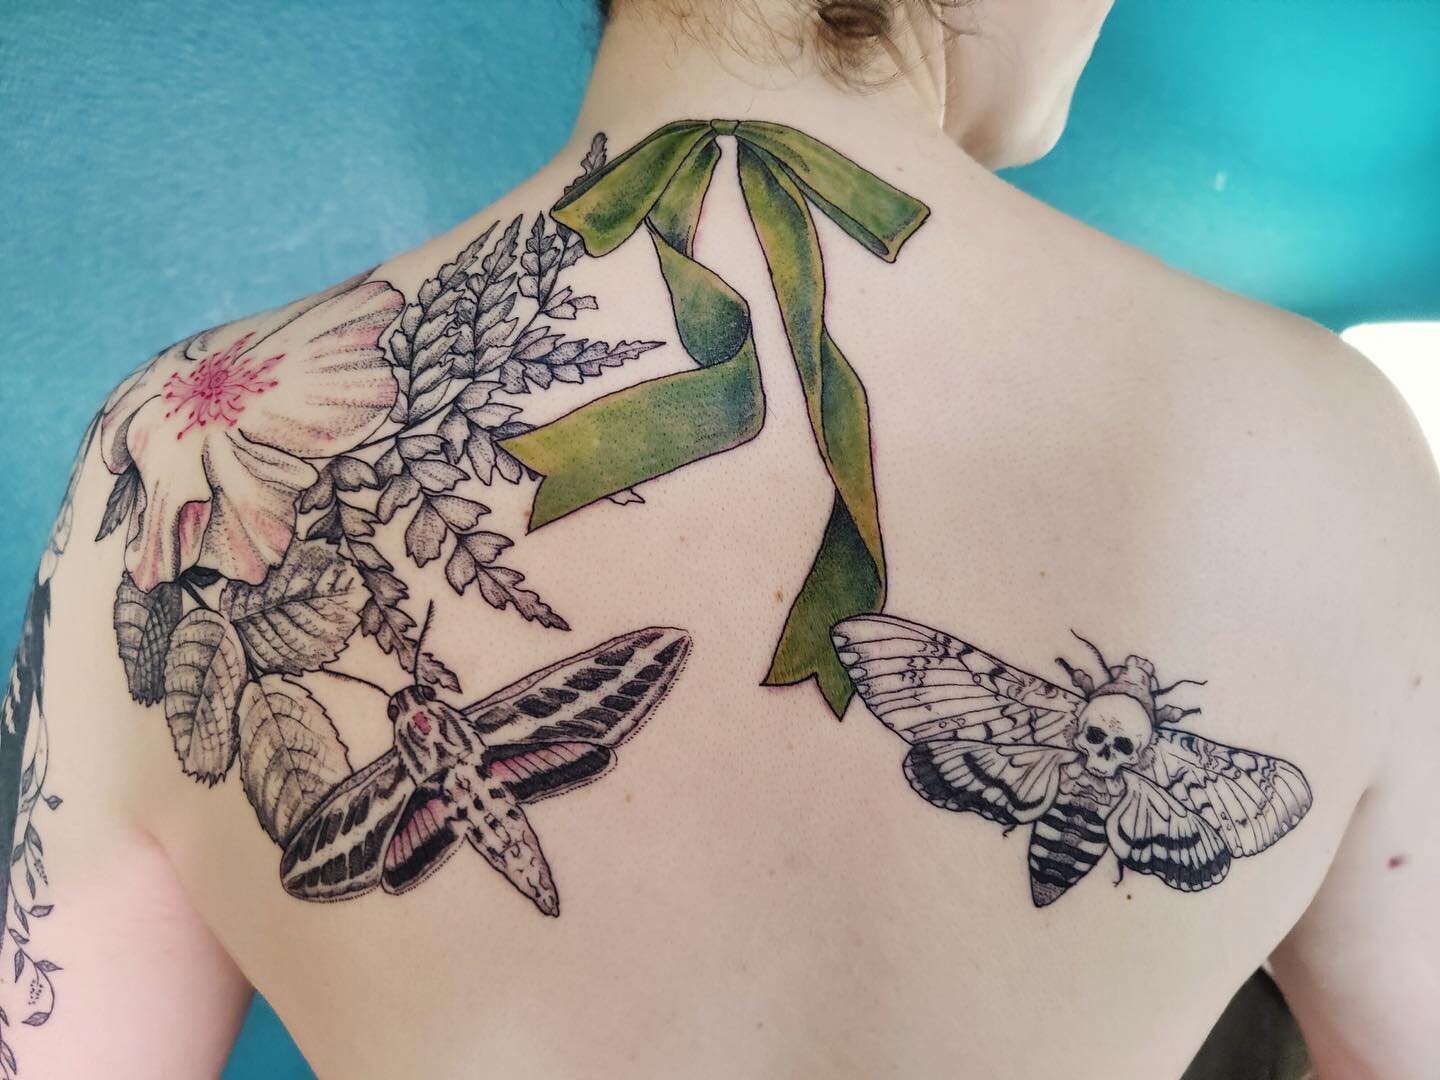 Thank you for these lovely photos Alex! We did all of this in one session. I&rsquo;m dying over this shade of green!
&bull;
&bull;
&bull;
#mothtattoo #deathheadmothtattoo #deathheadmoth #literarytattoo #wildrosetattoo #backtattoo #blackworkerssubmiss